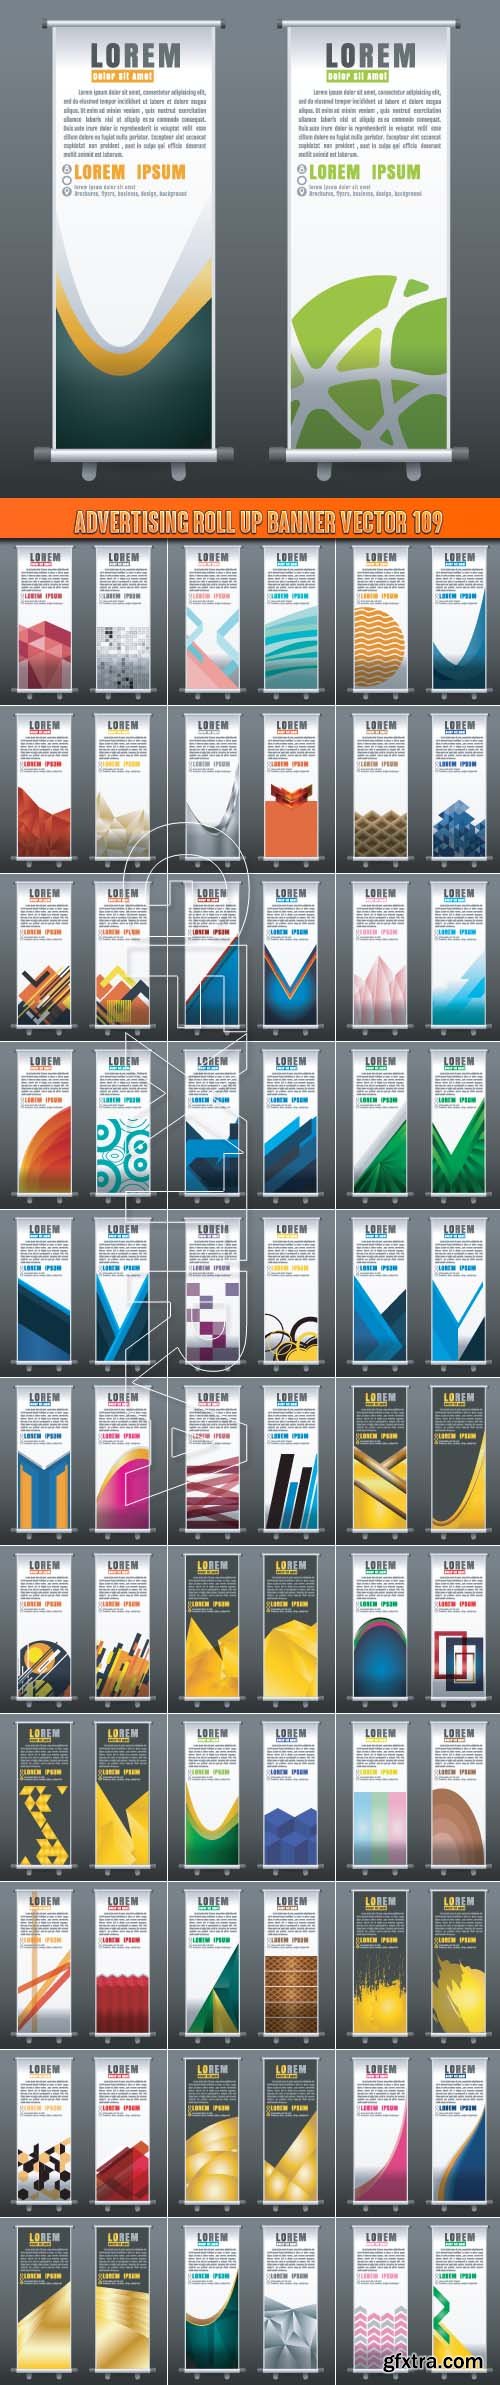 Advertising Roll up banner vector 109